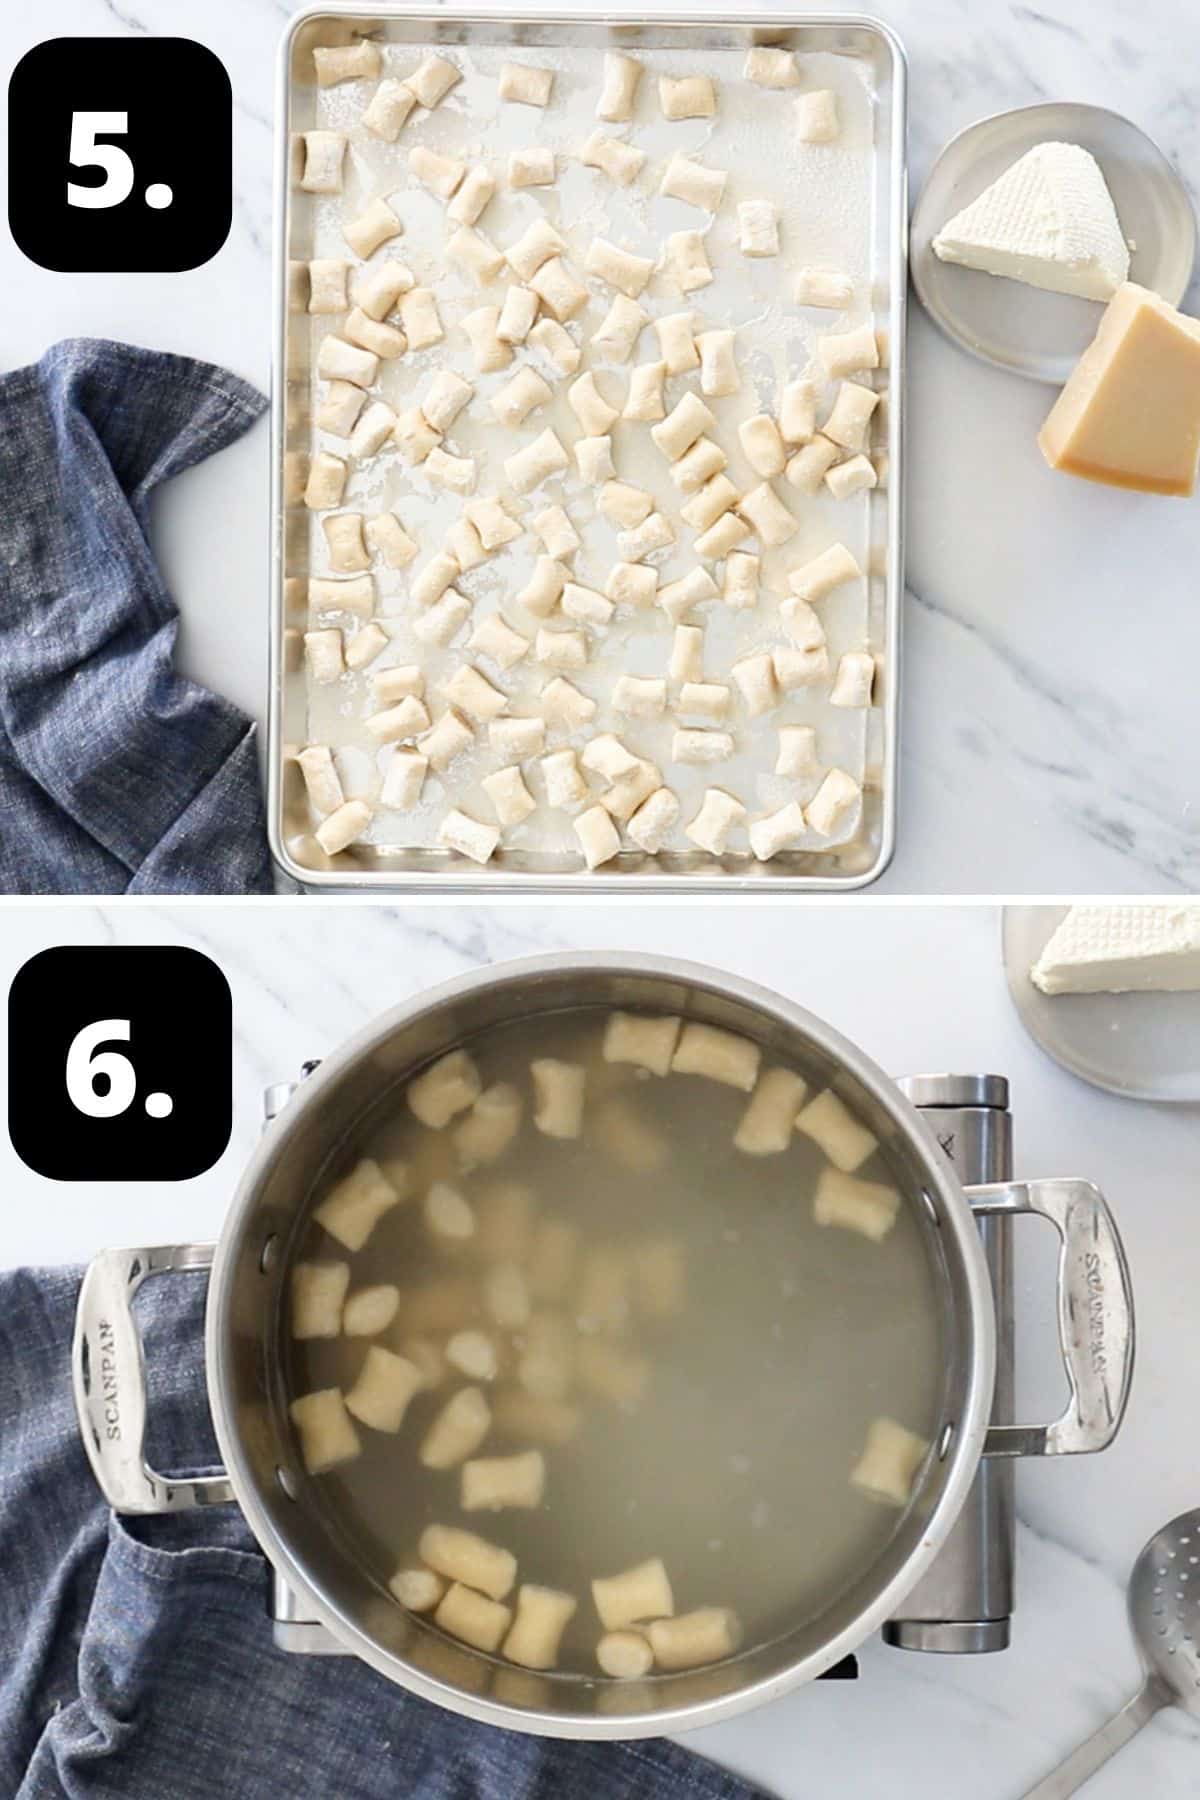 Steps 5-6 of preparing this recipe - the prepared gnocchi on a tray and cooking them in a saucepan of boiling water.